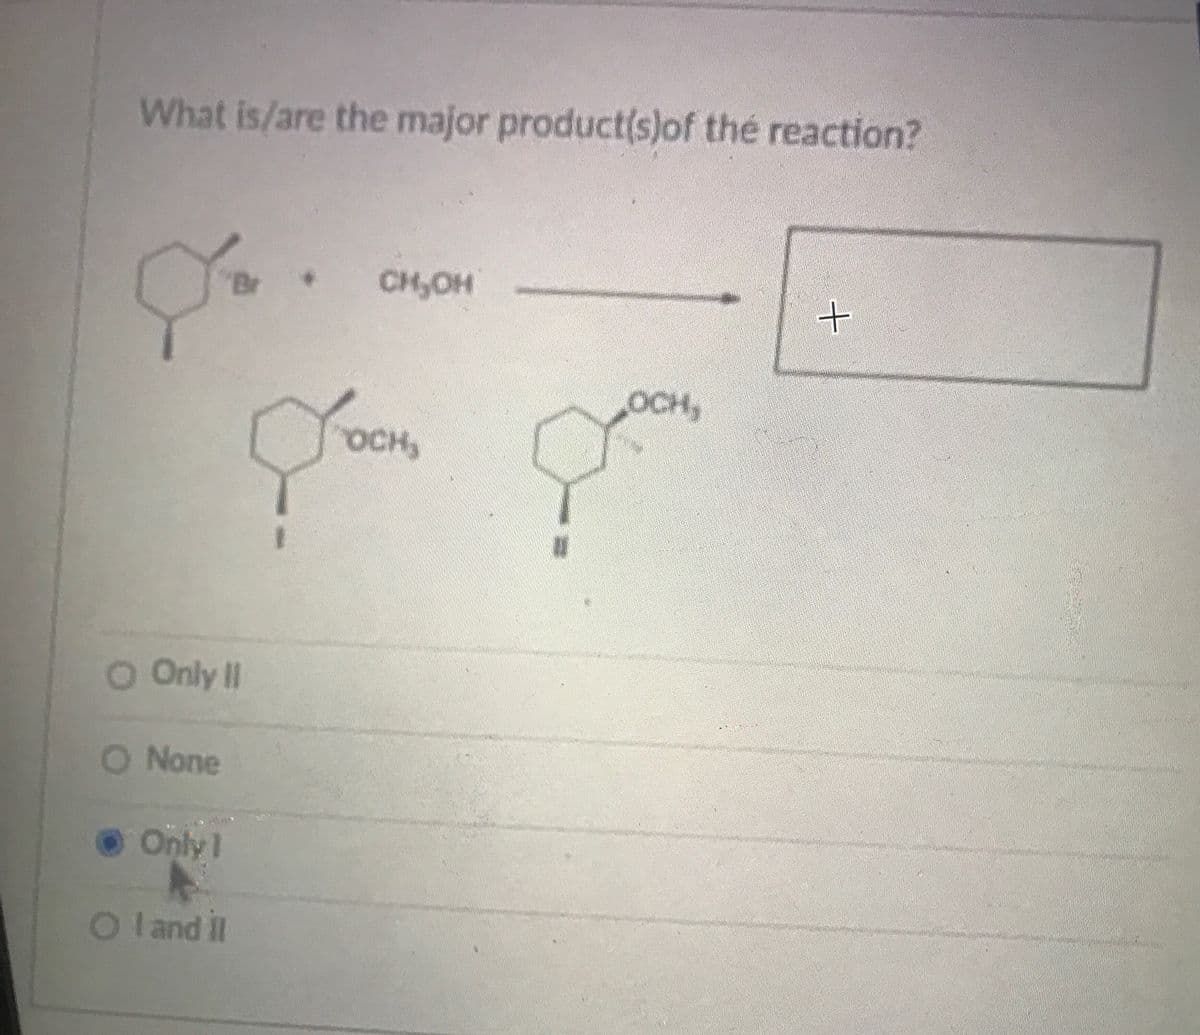 What is/are the major product(s)of thé reaction?
Br
CH,OH
осн,
OCH,
Only II
O None
Only1
O land il
